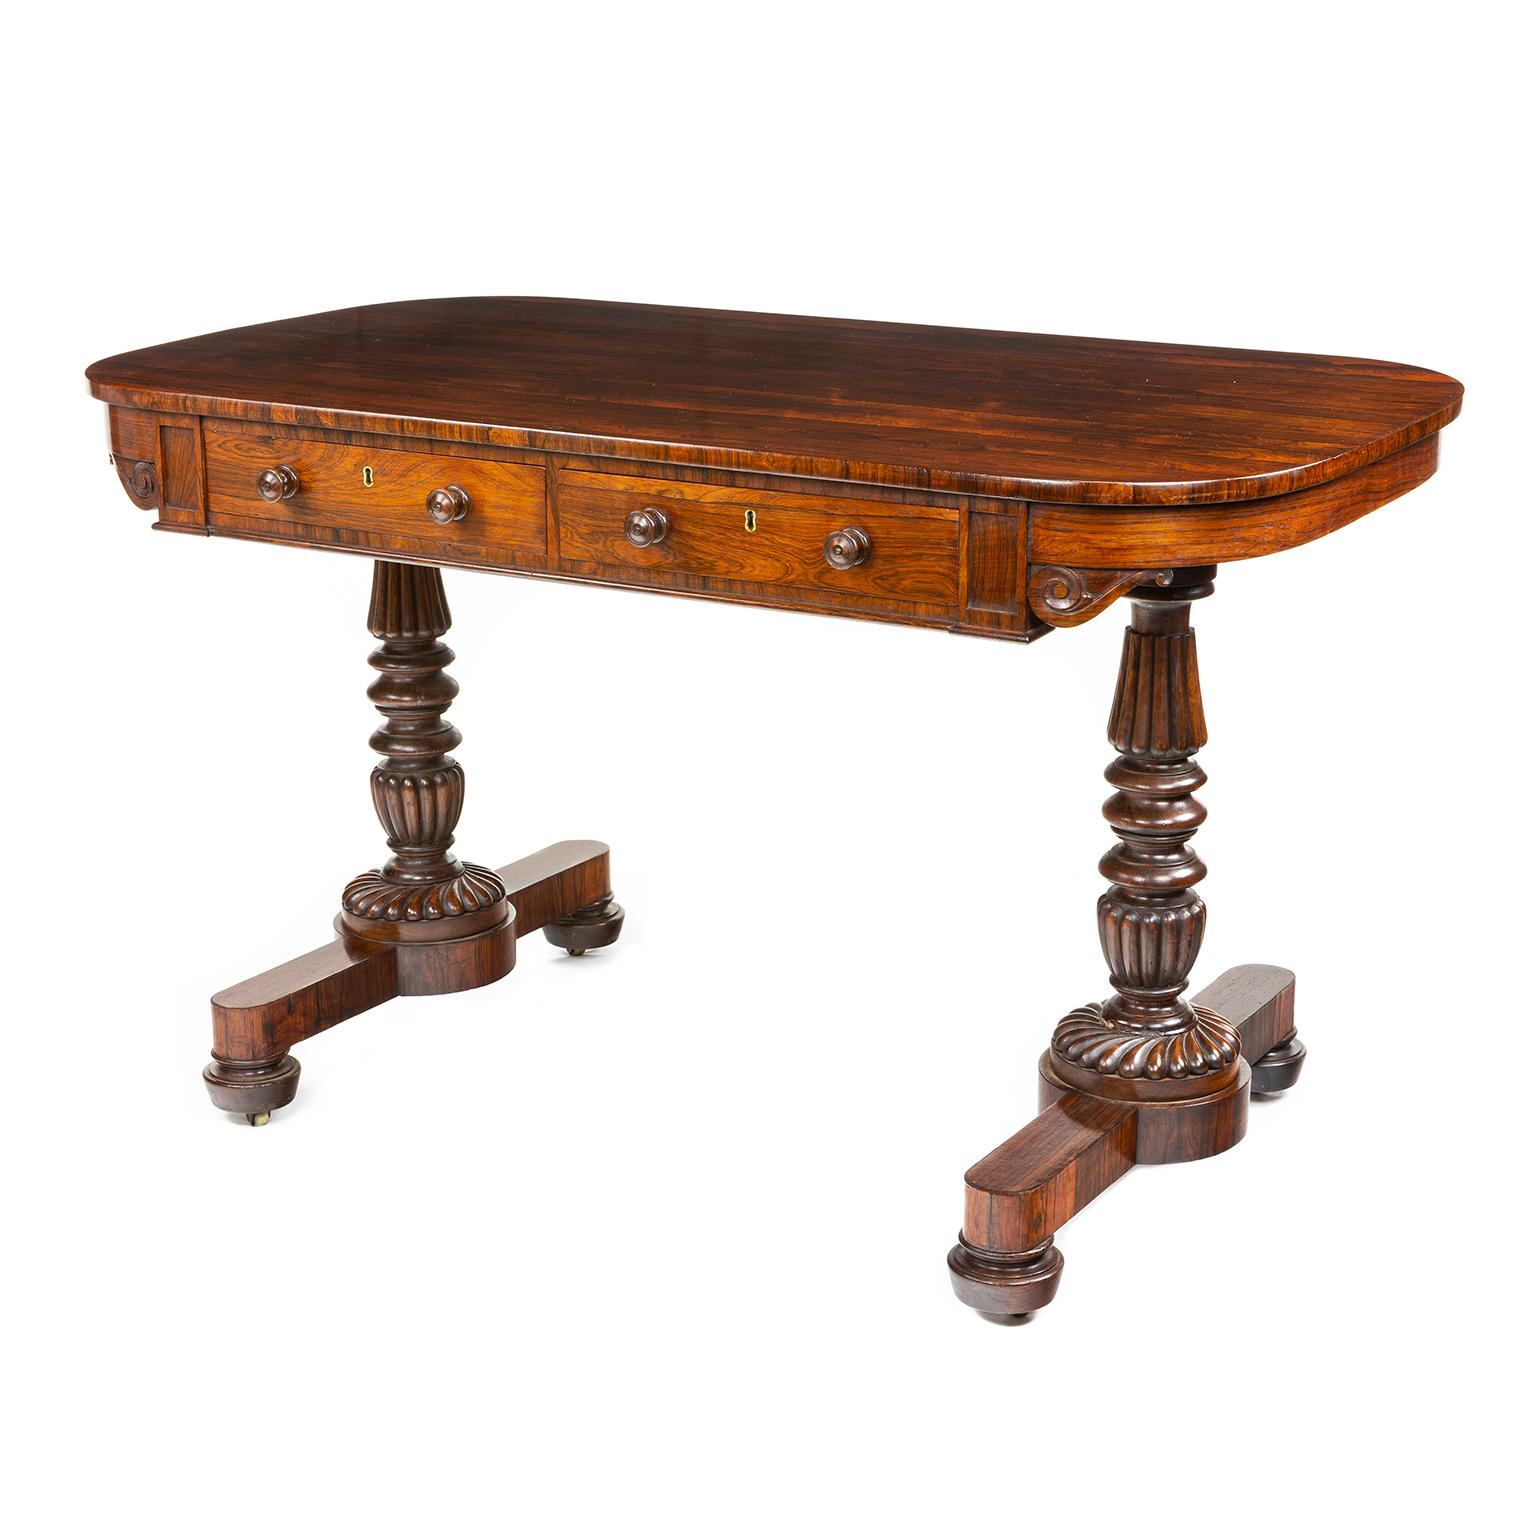 A fine goncalo alves library table firmly attributed to Gillows and dating to about 1810.

Gillows of Lancaster and London, also known as Gillow & Co., was an English furniture making firm based in Lancaster, Lancashire, and in London. It was